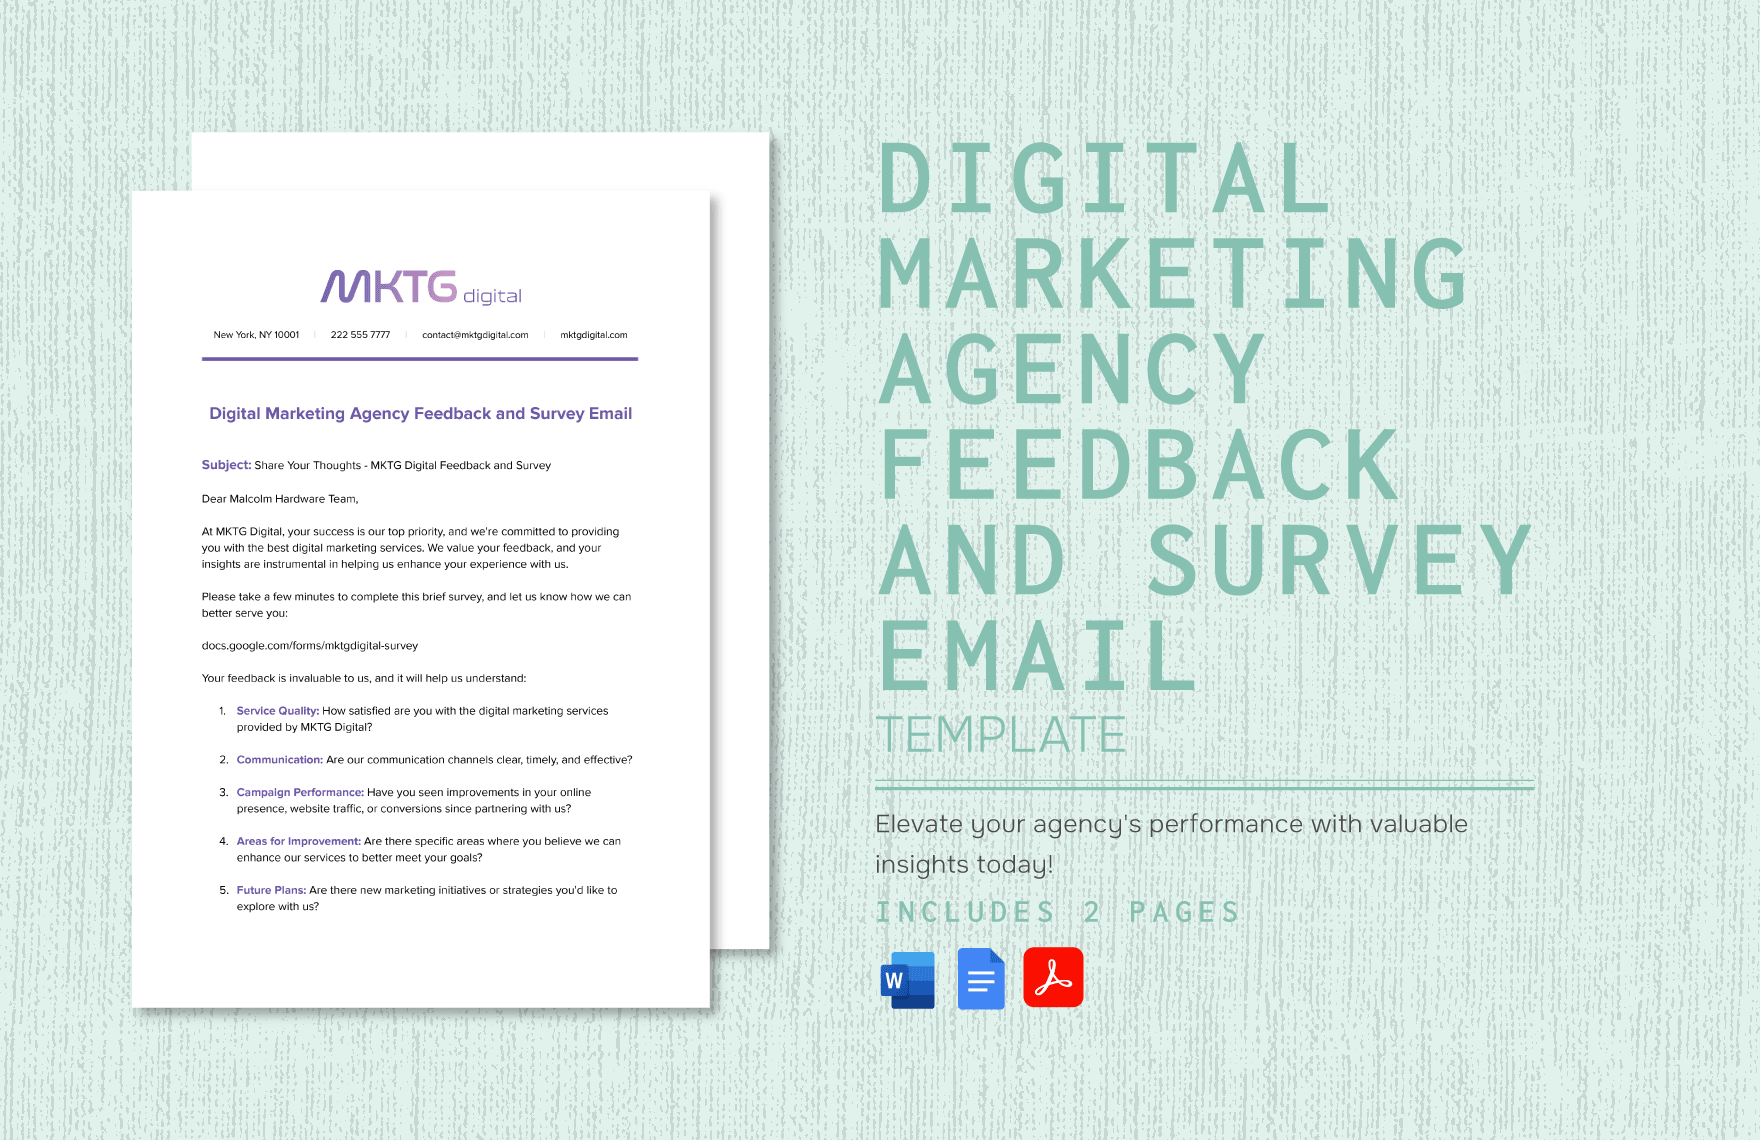 Digital Marketing Agency Feedback and Survey Email Template in Word, Google Docs, PDF